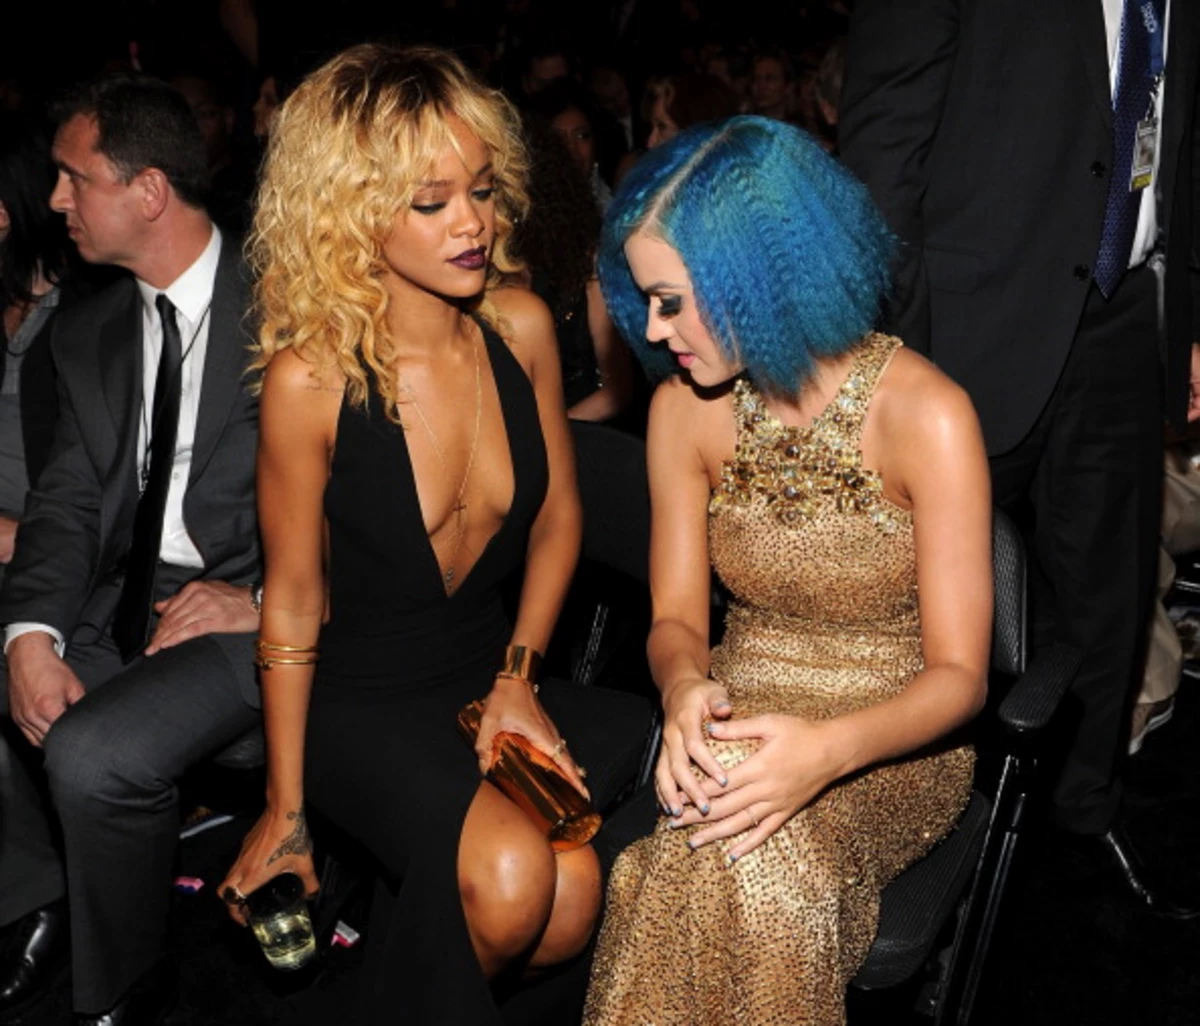 Why Is Katy Perry Starring At Rihanna's Chest? [Photos]